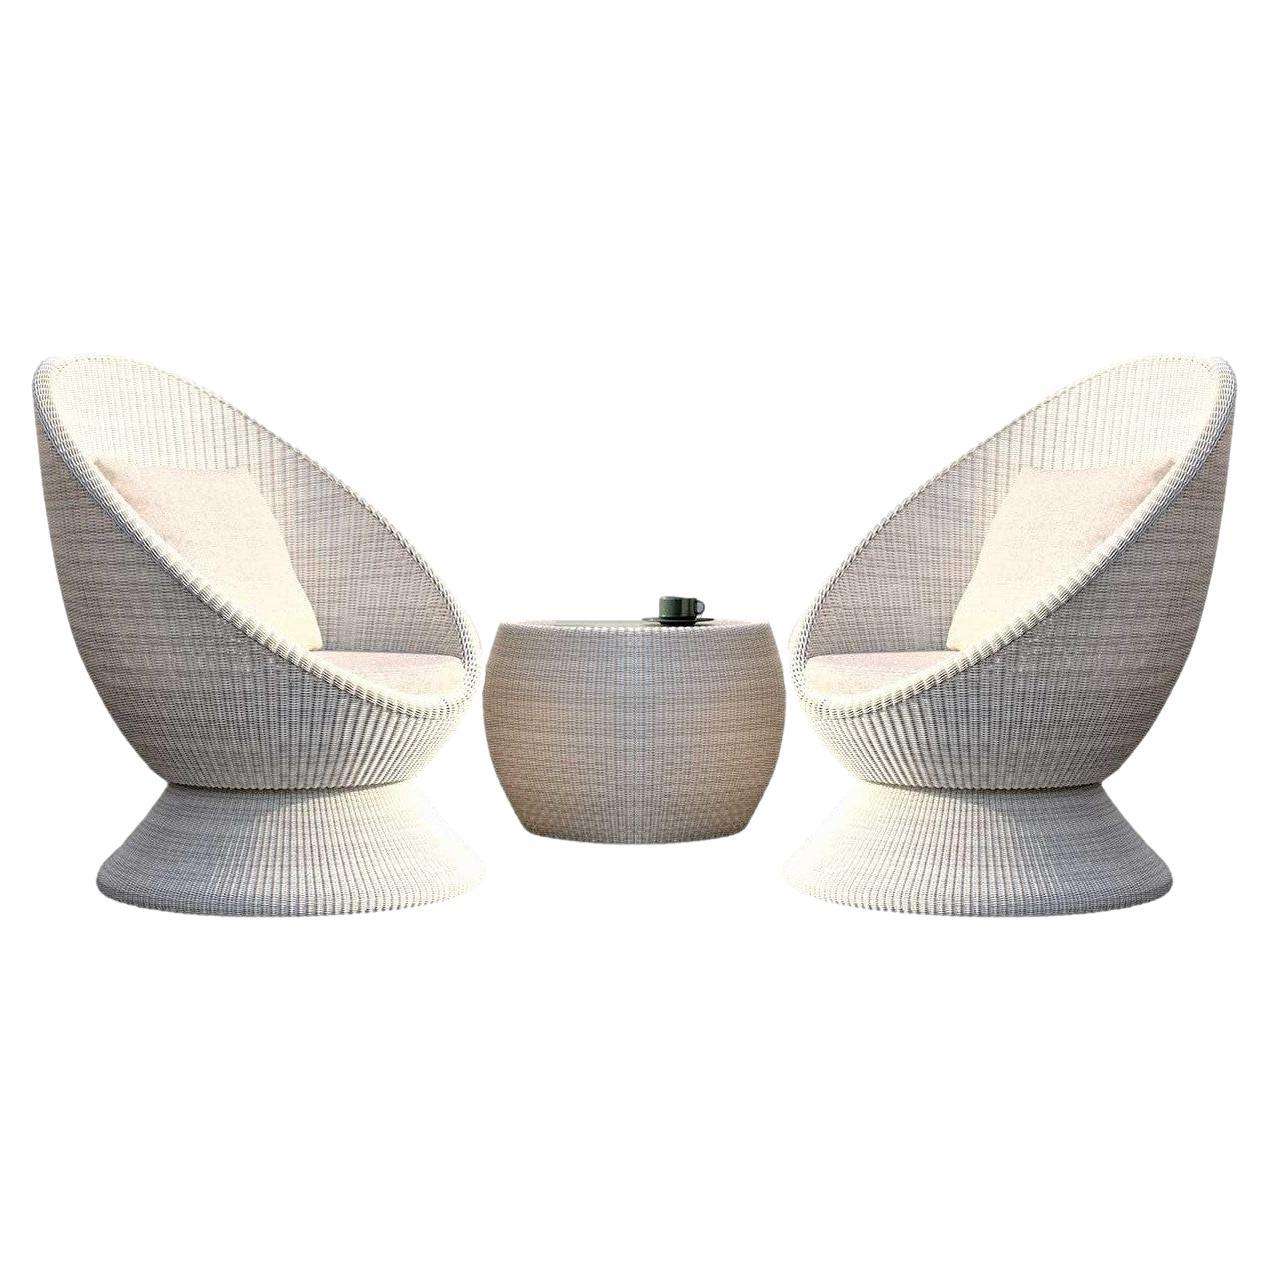 The minimalist design of this high back lounge chair creates the illusion of flotation that rotates a full 360 degrees, while the solid base ensures stability and safety. This is the ultimate in comfort and relaxation. Timeless and carefully